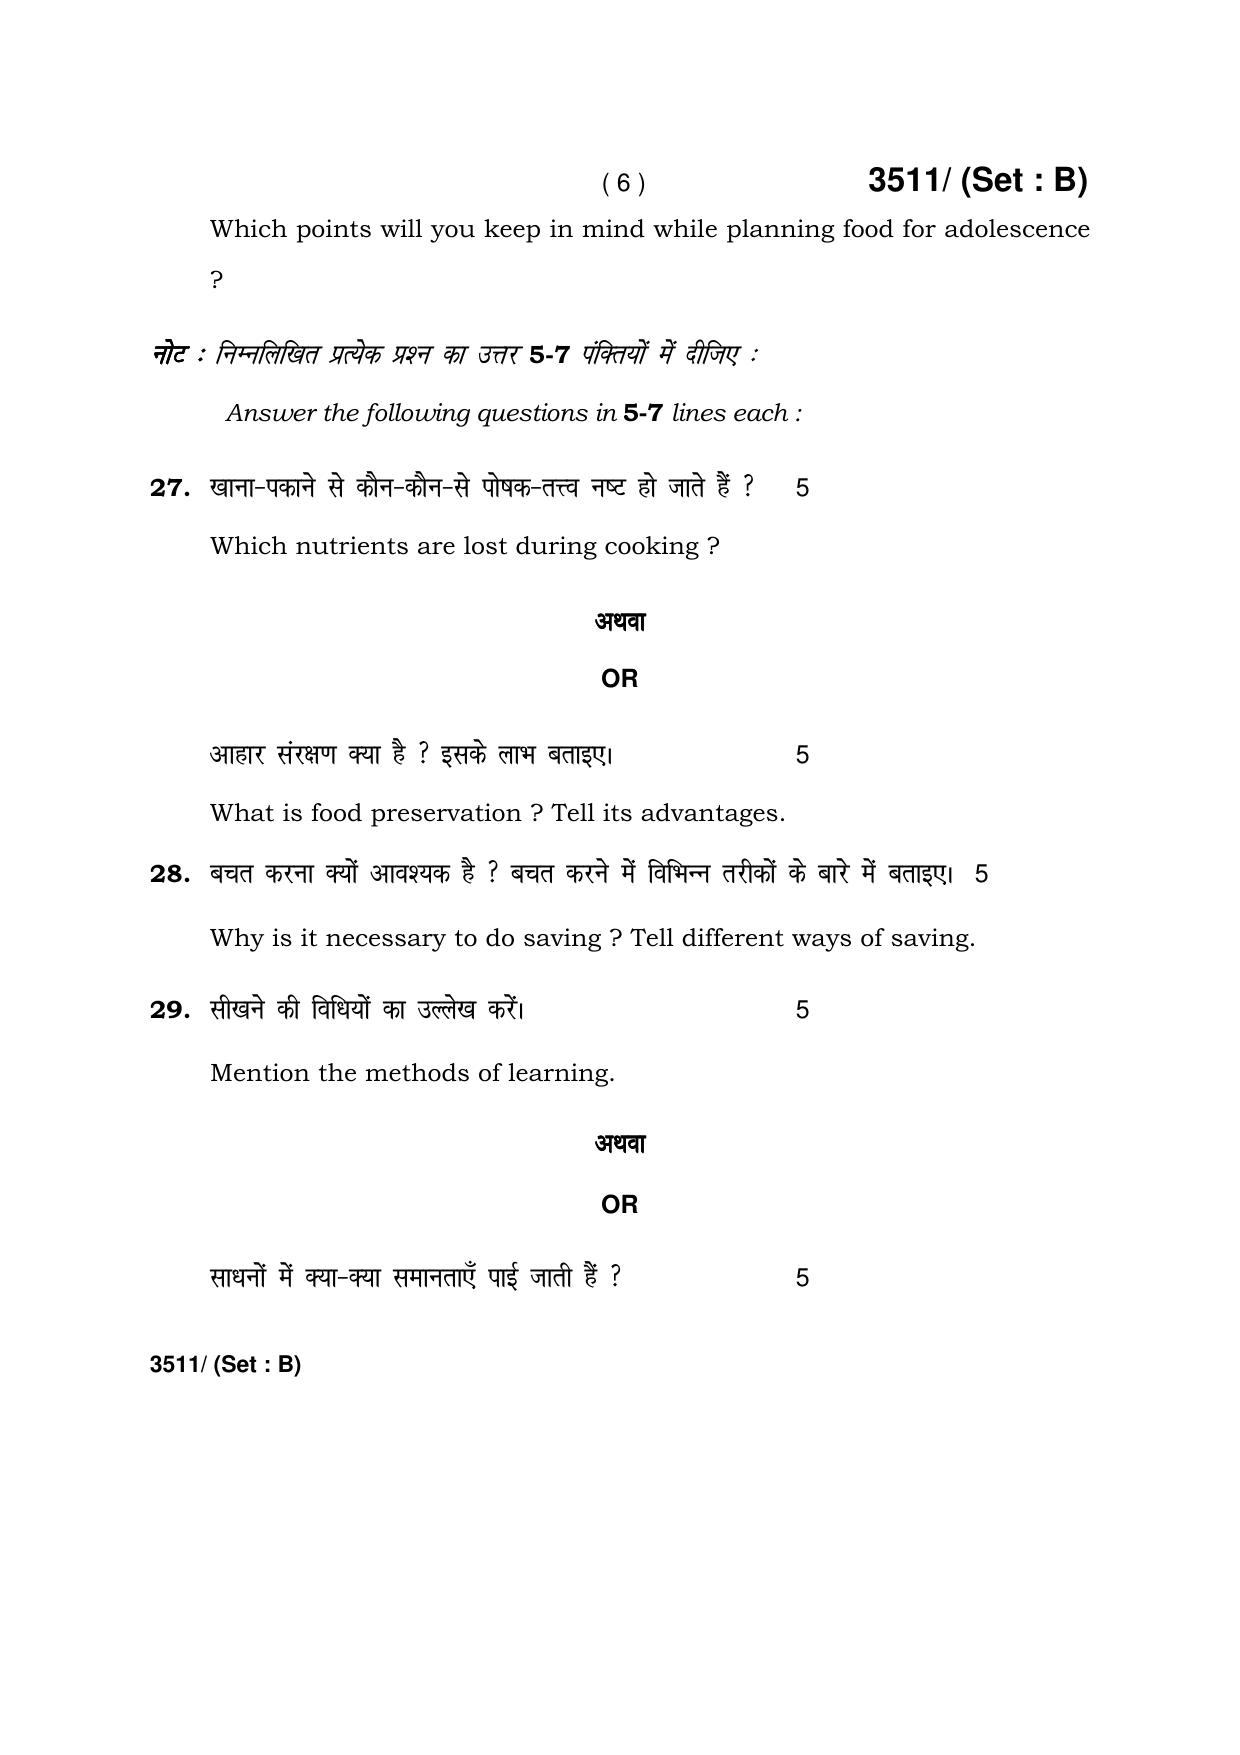 Haryana Board HBSE Class 10 Home Science -B 2018 Question Paper - Page 6